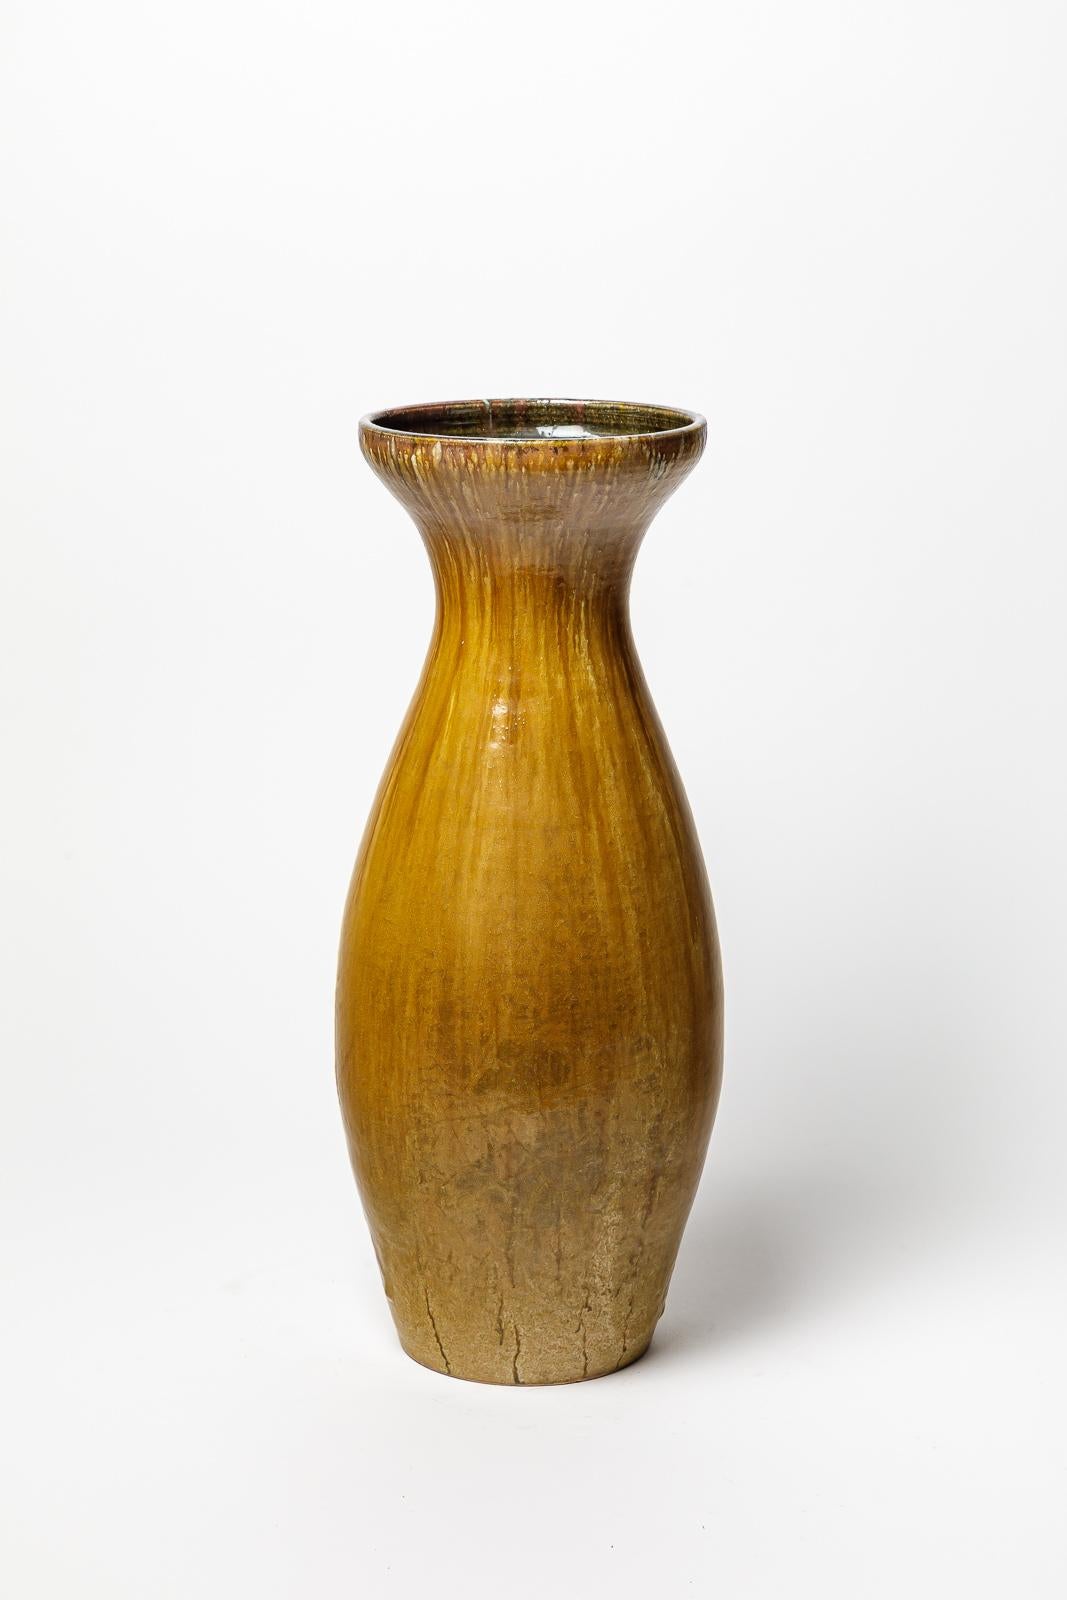 Beaux Arts Ocher glazed stoneware vase by Accolay, circa 1960-1970. For Sale